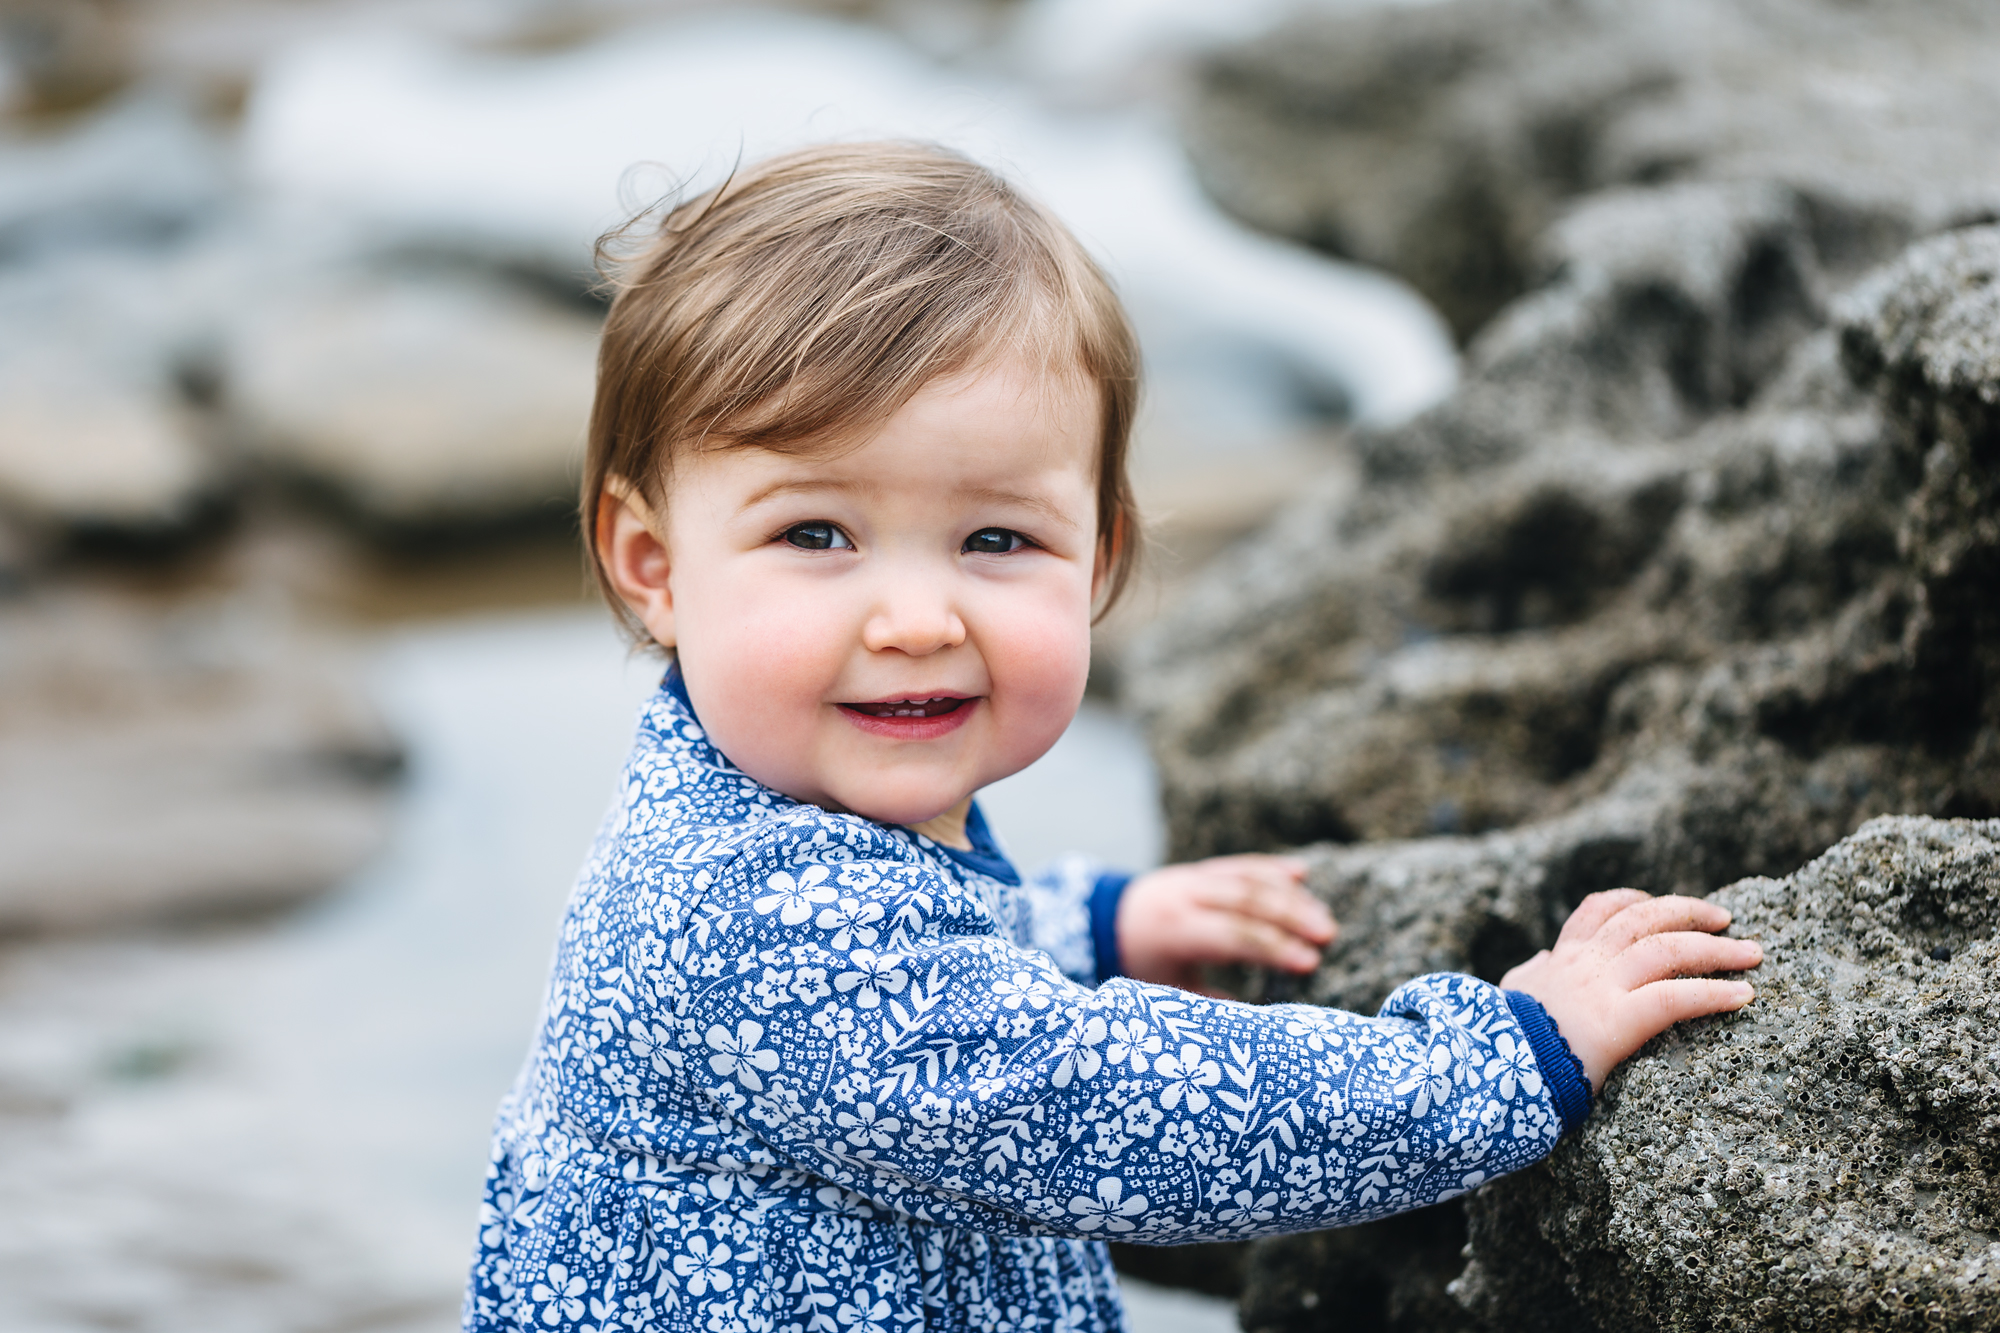 Newborn, baby, children and family photographer South Wales, near Cardiff, Caerphilly